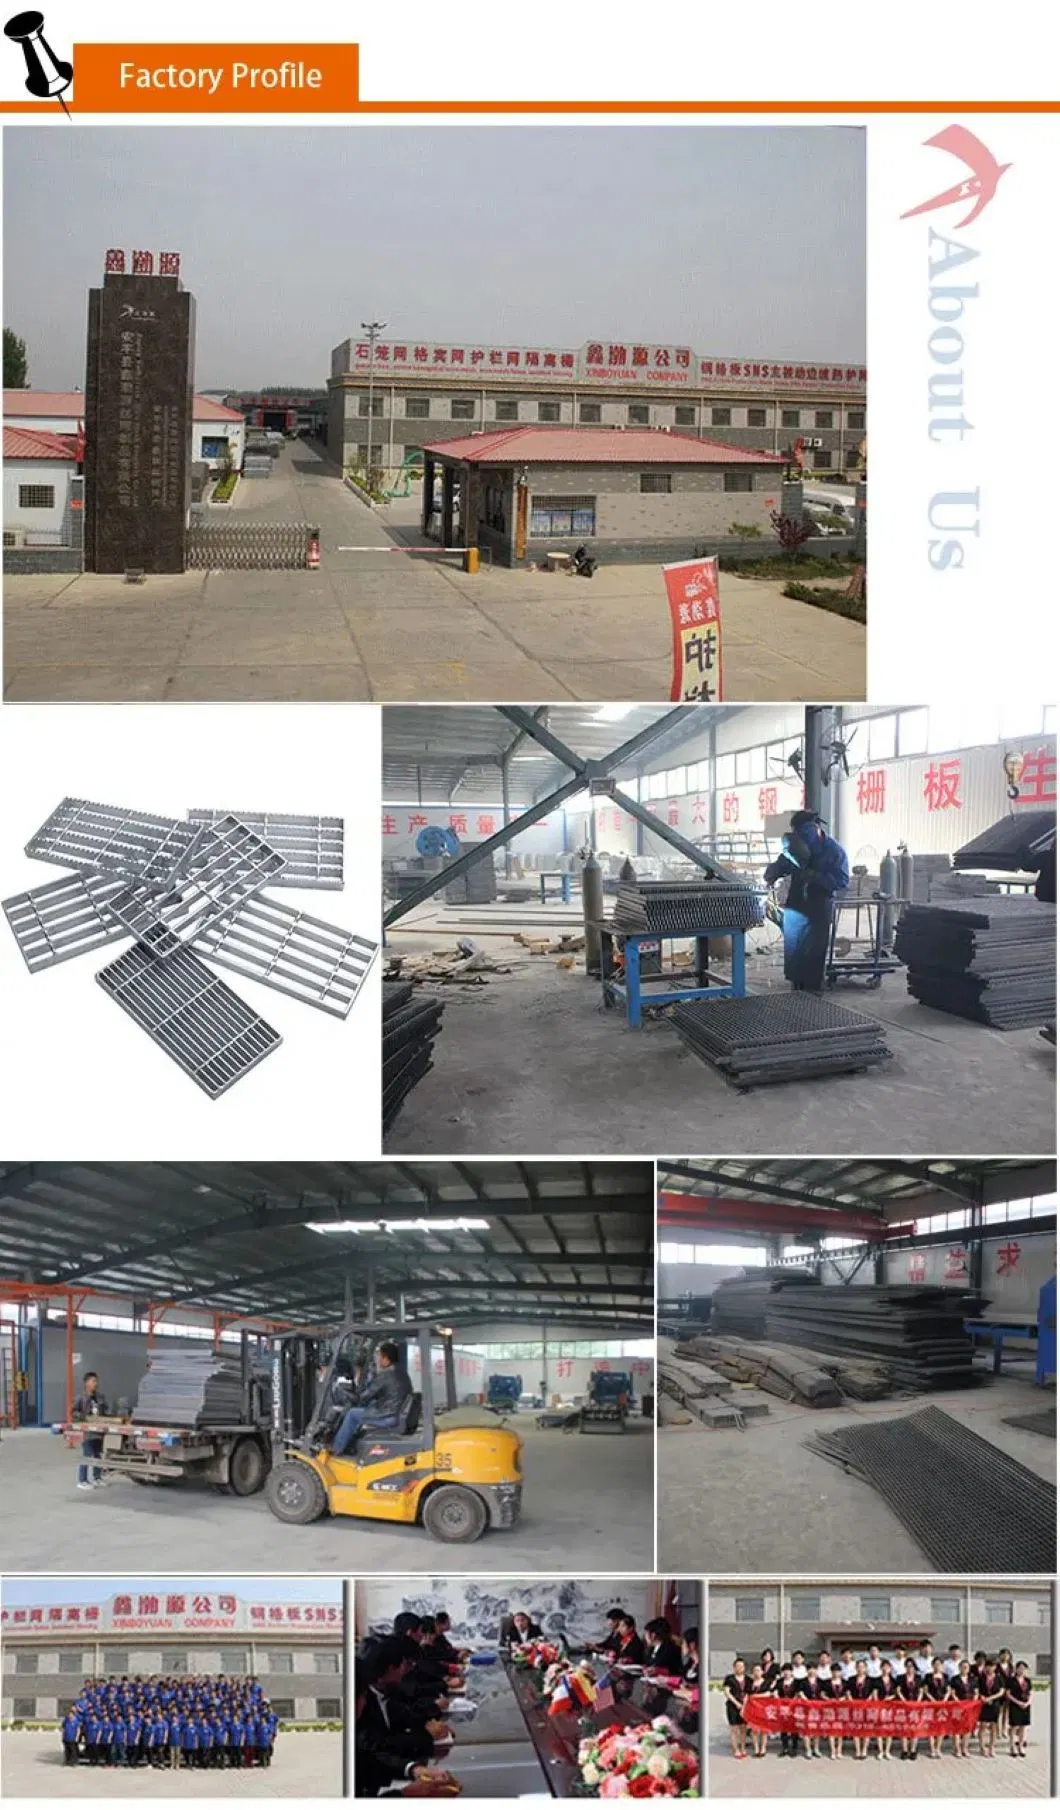 Hot Sale Building Material Hot Dipped Galvanized Steel Grating /Hot DIP Heavy Duty Galvanized Iron Bar Galvanized Steel Grating